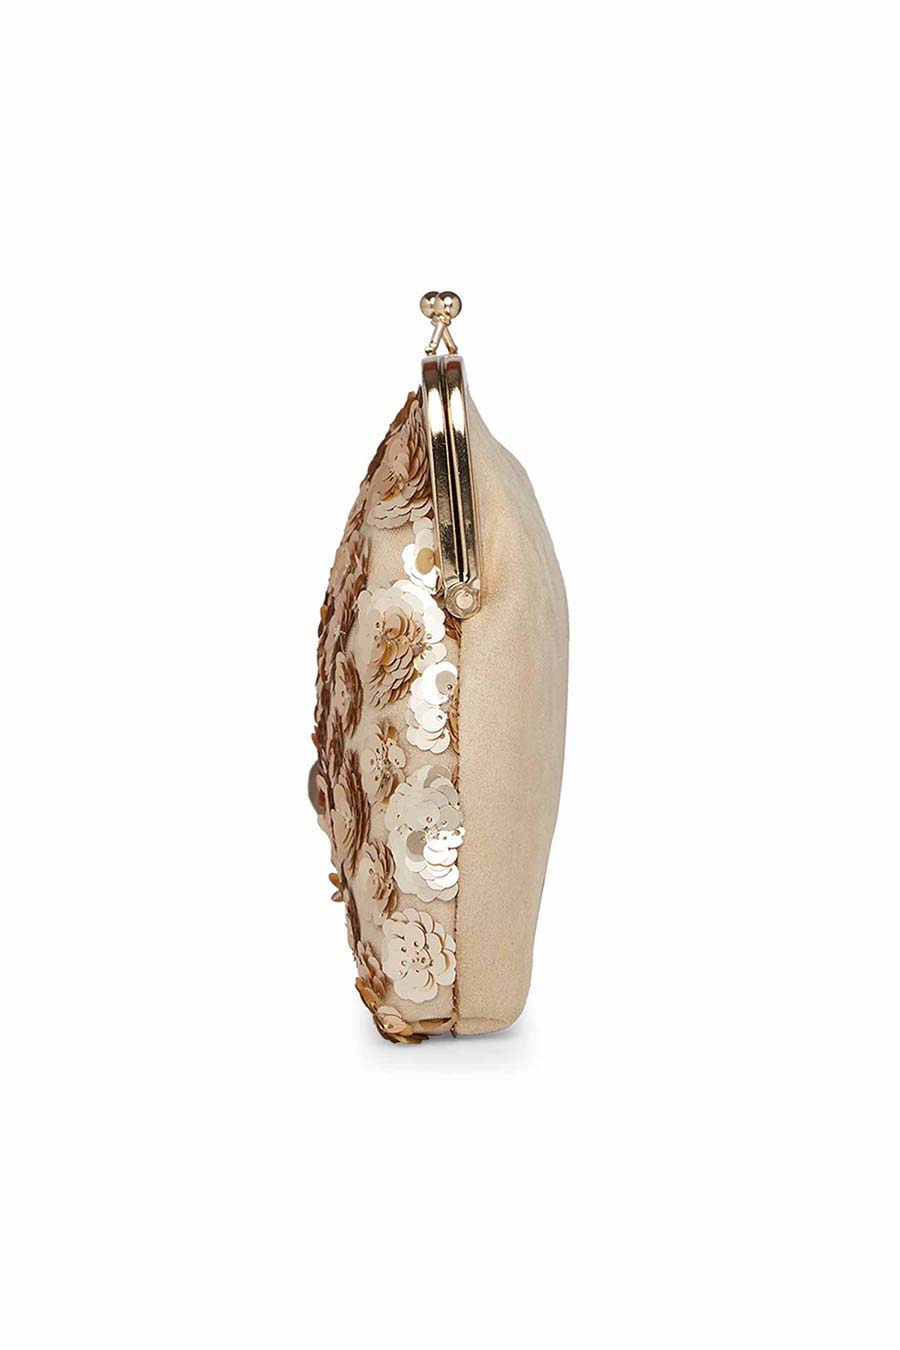 Gold Flowers Pouch Clutch